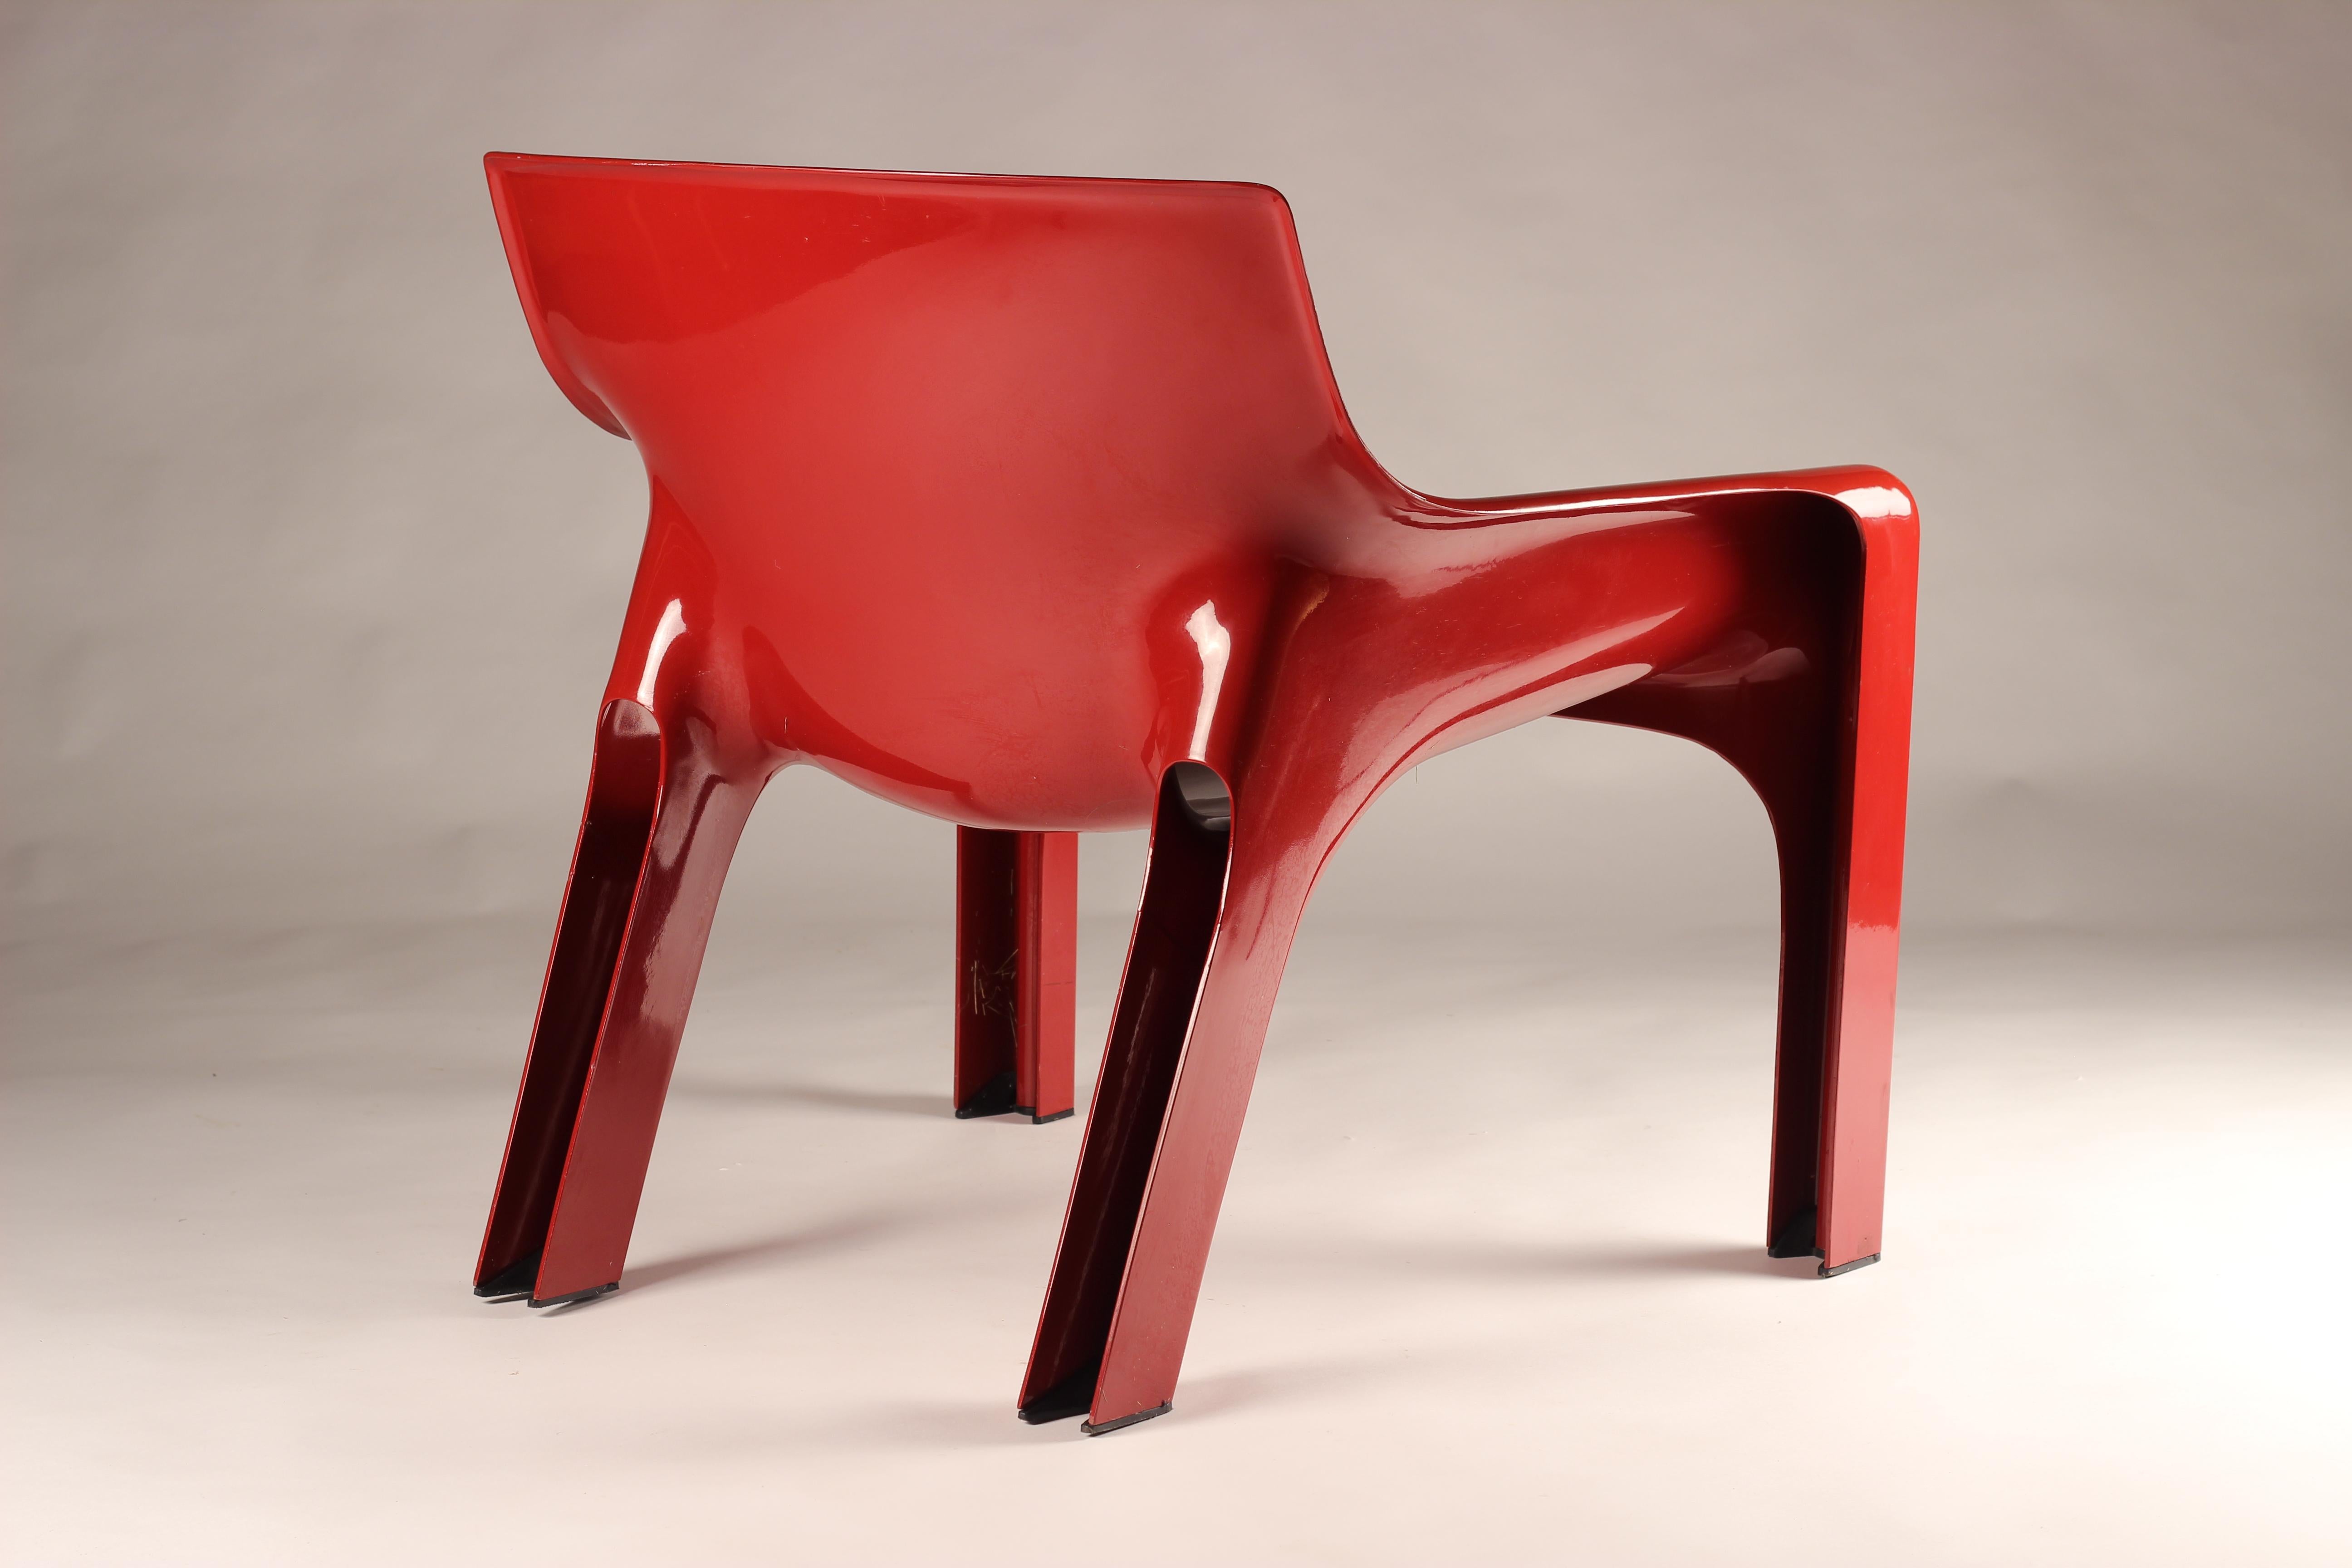 Post-Modern Pair of Red Vicario Lounge Chairs Design by Vico Magistretti Made by Artemide